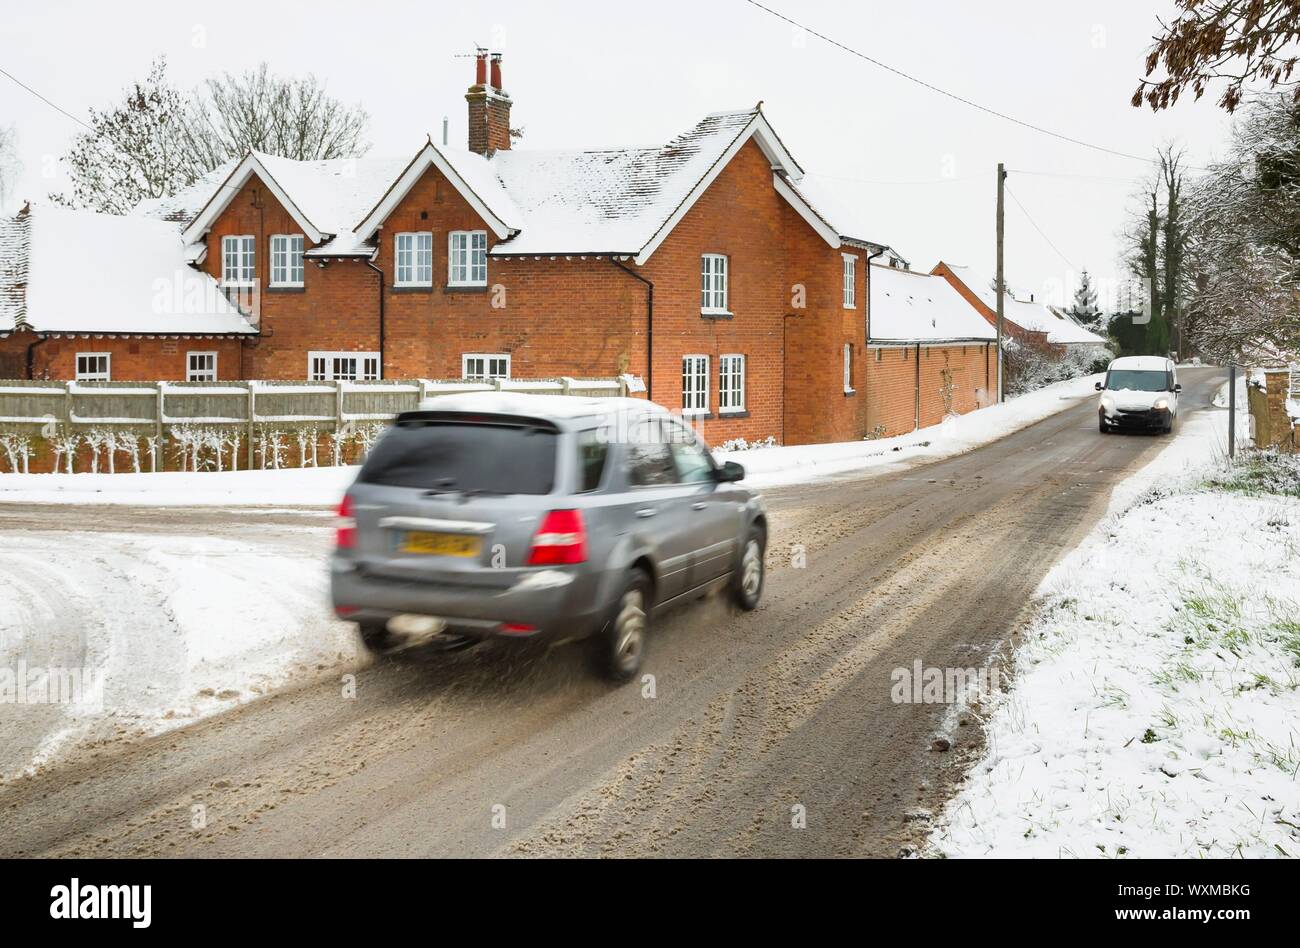 Cars driving in snow in winter on rural English roads. Buckinghamshire, England, UK Stock Photo